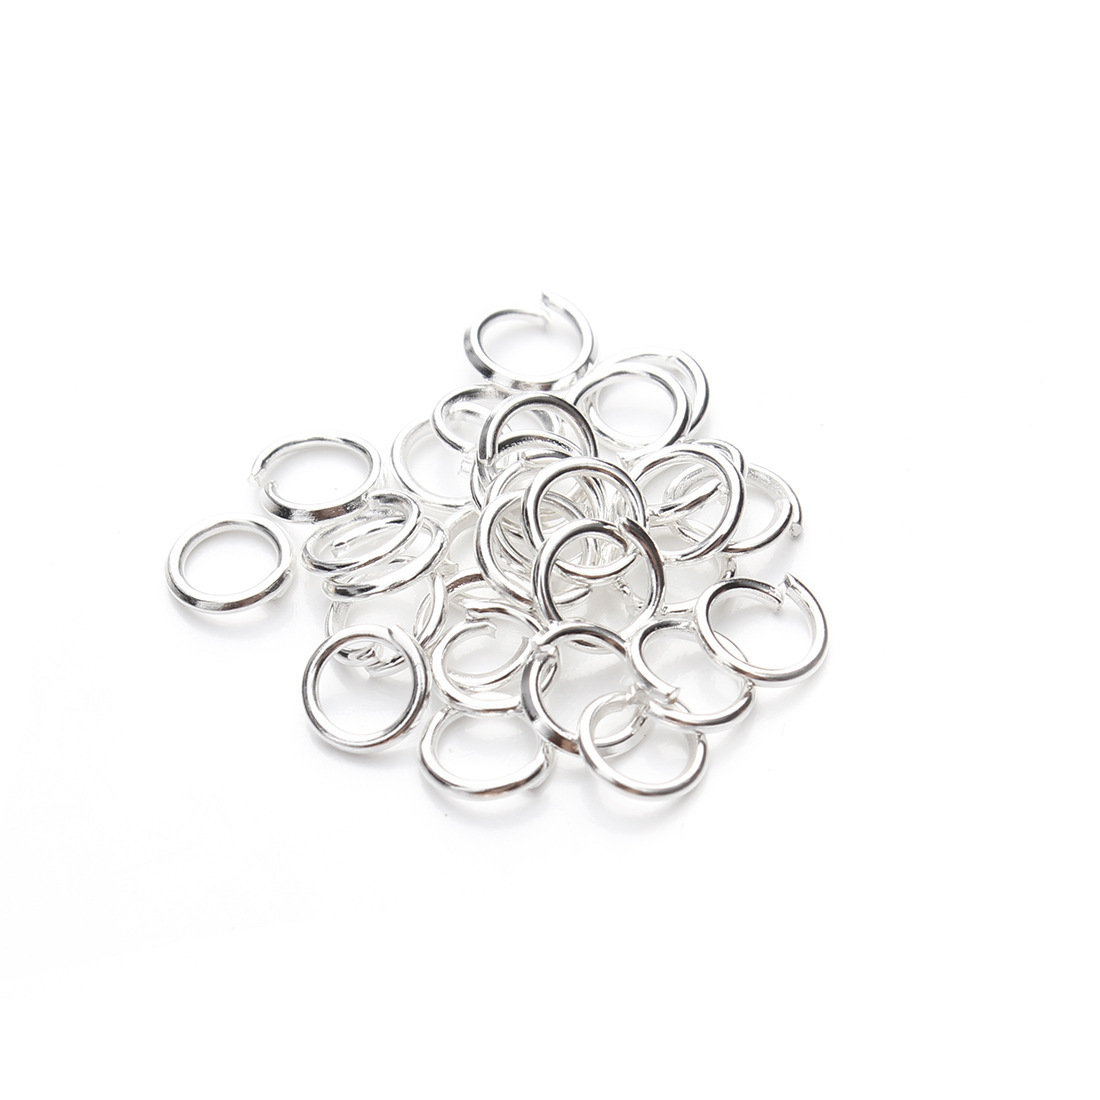 Silver outer diameter 7mm